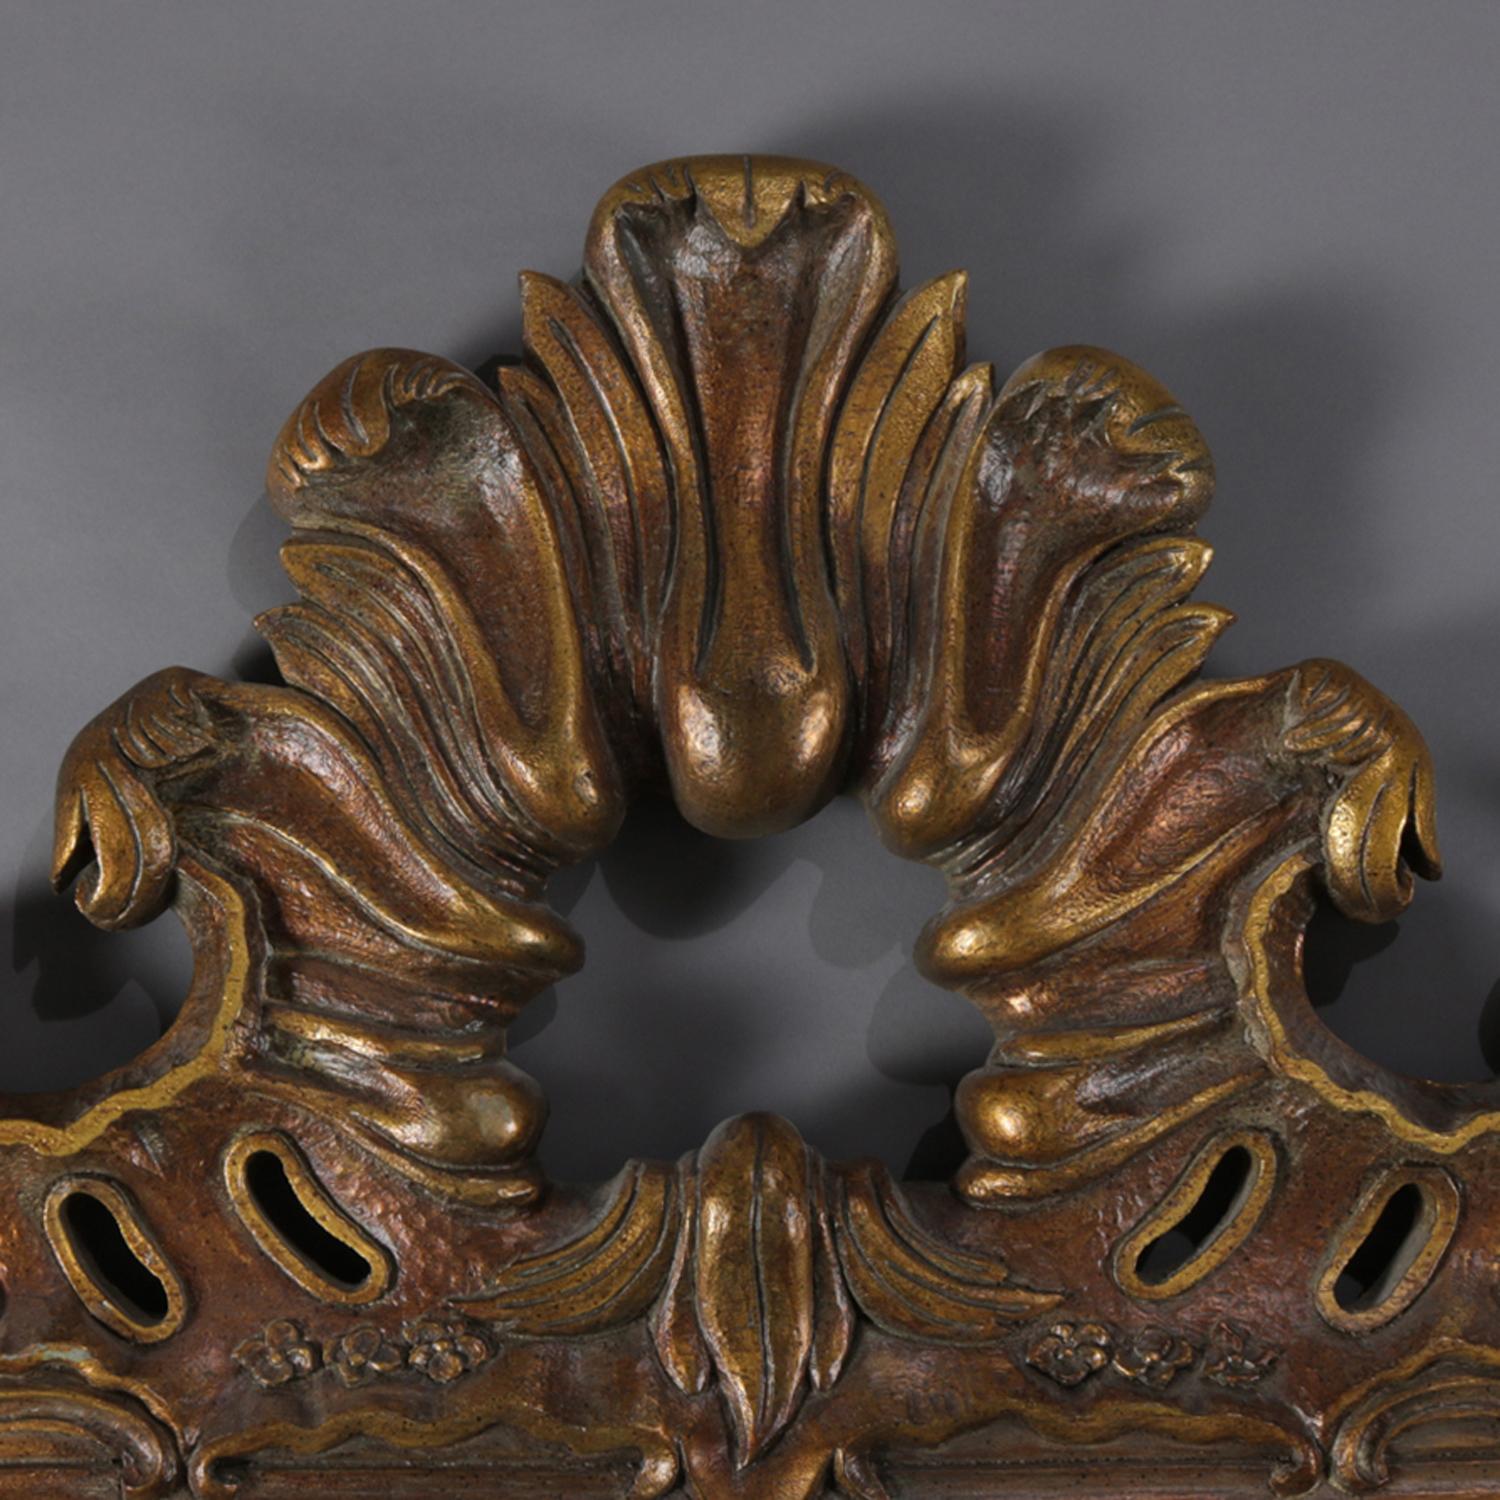 Oversized Italian Rococo overmantel wall mirror features foliate form with pierced and gadroon crest and C-scroll and gadroon corners, 20th century


Measures: 60